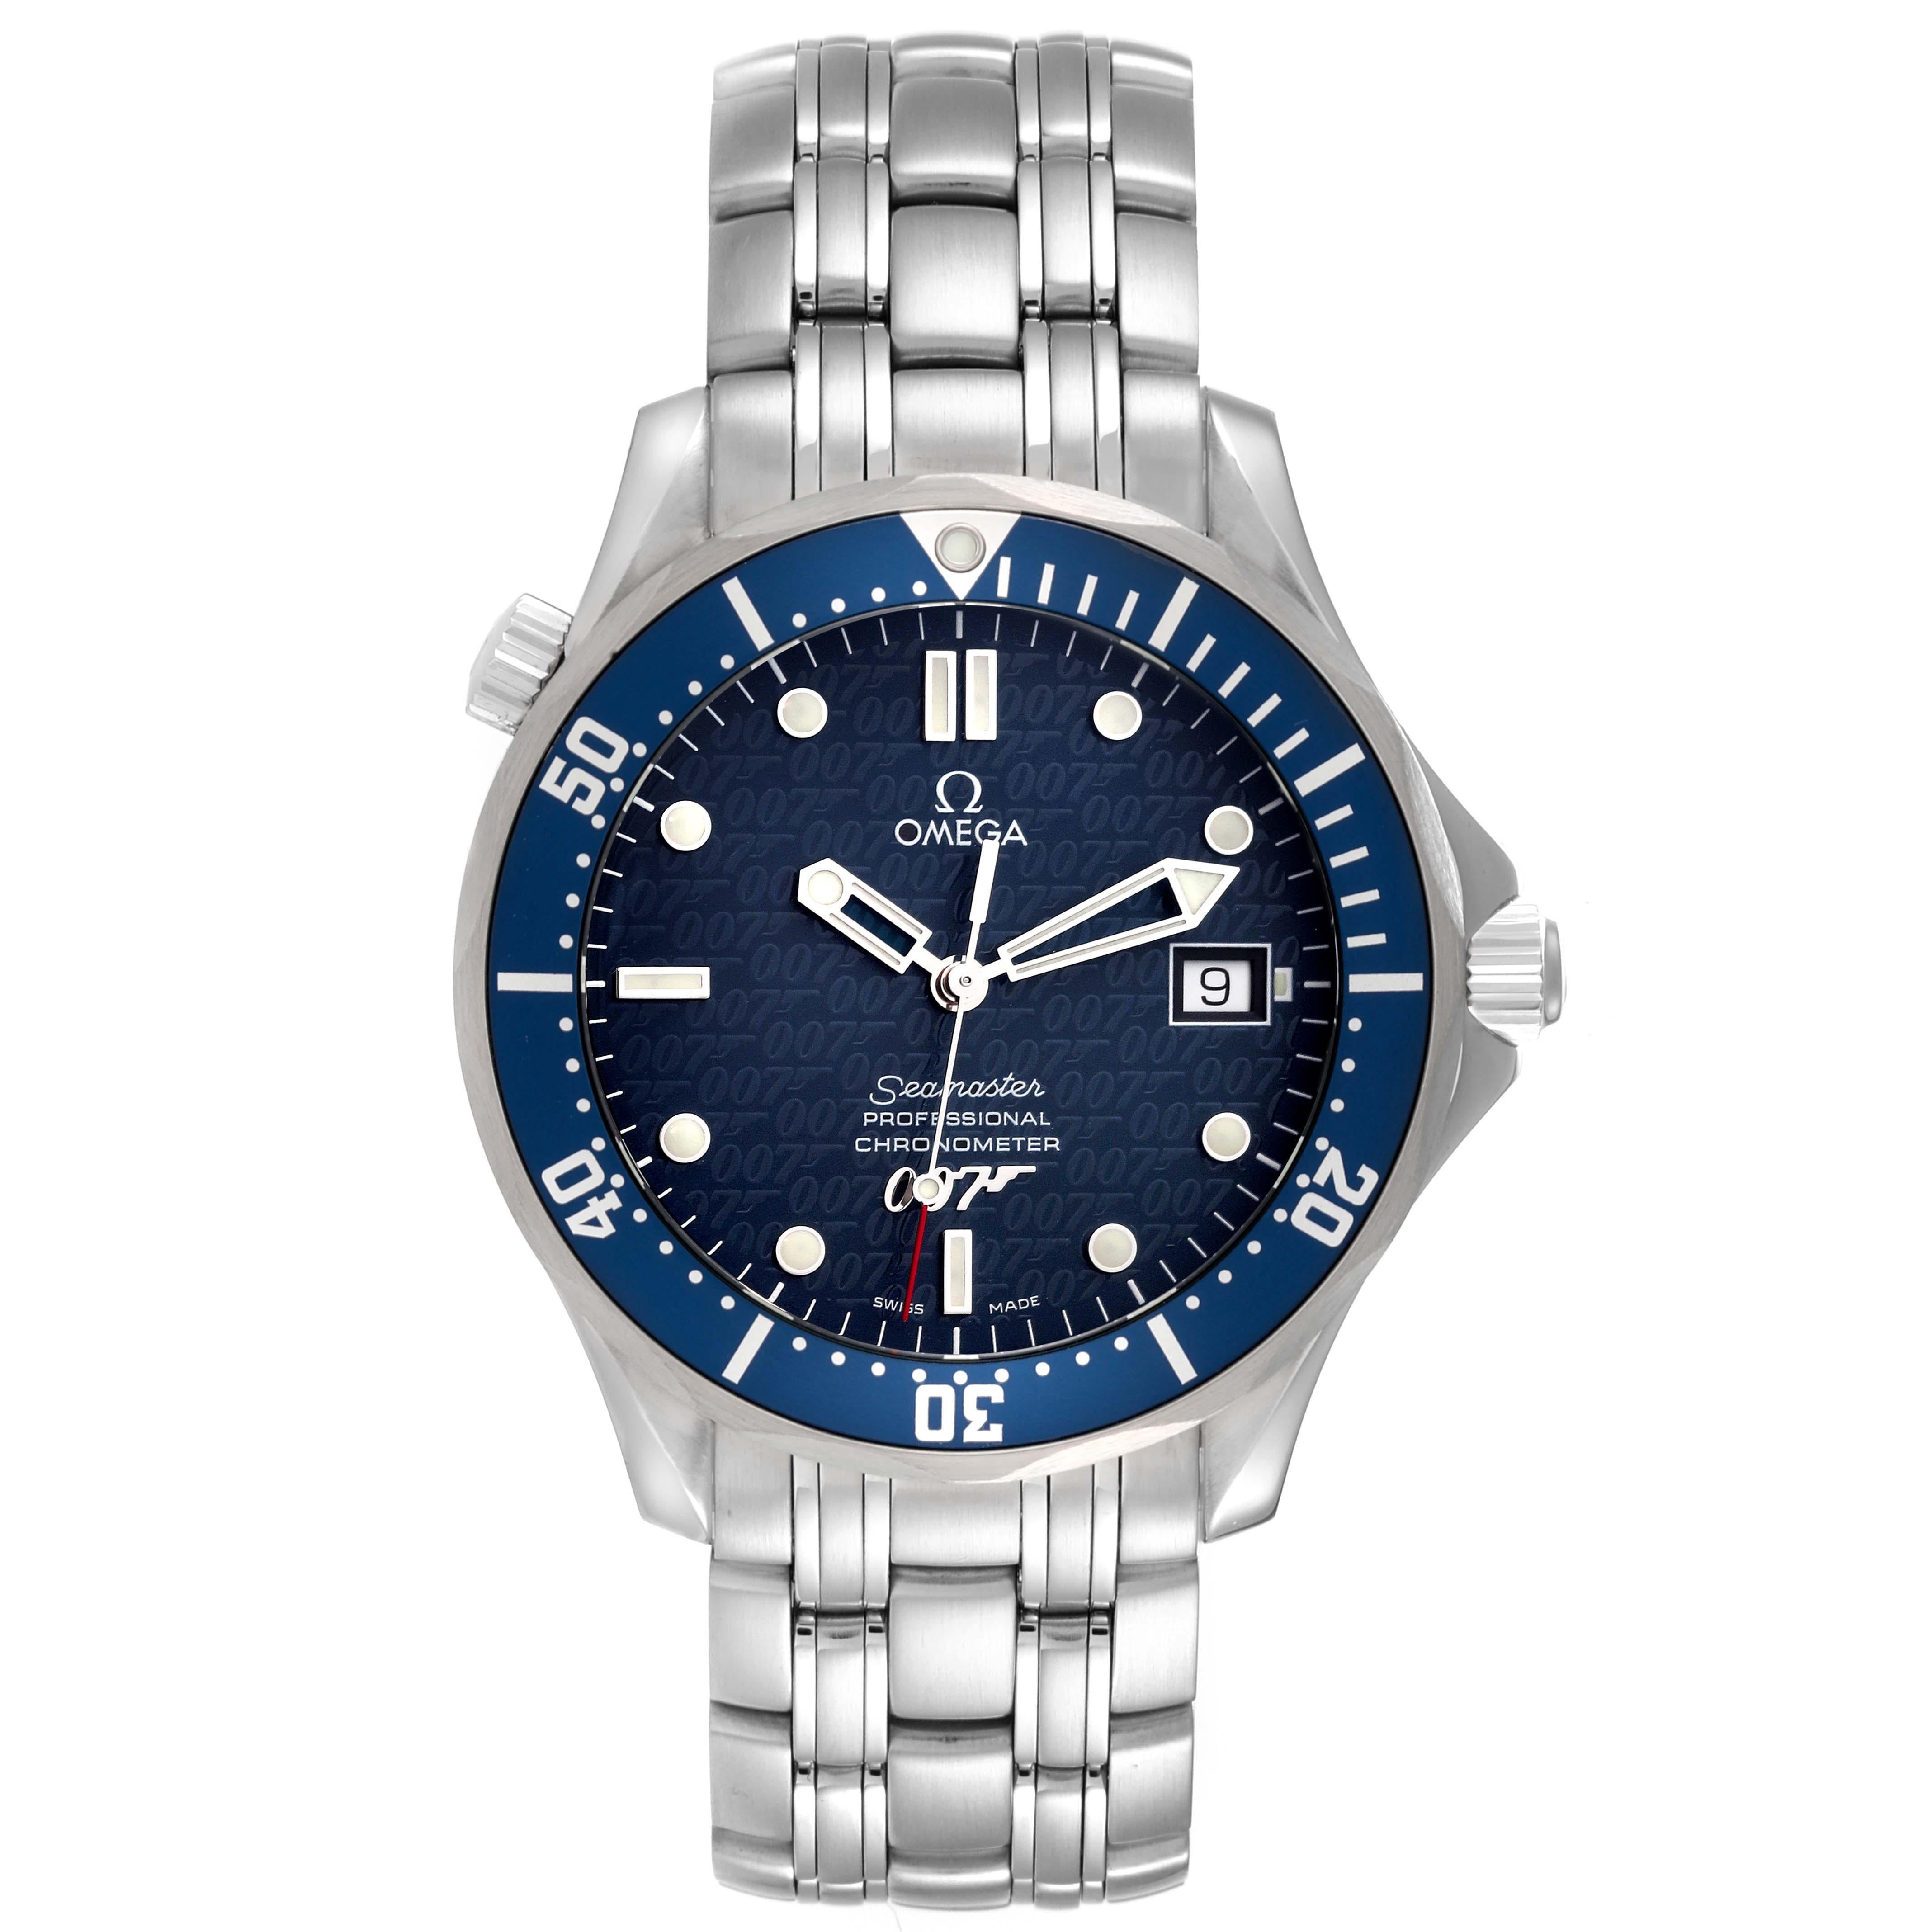 Omega Seamaster 40 Years James Bond Limited Edition Steel Mens Watch 2537.80.00. Officially certified chronometer automatic self-winding movement. Brushed and polished stainless steel case 41.00 mm in diameter. Omega logo on a crown. Screw down back